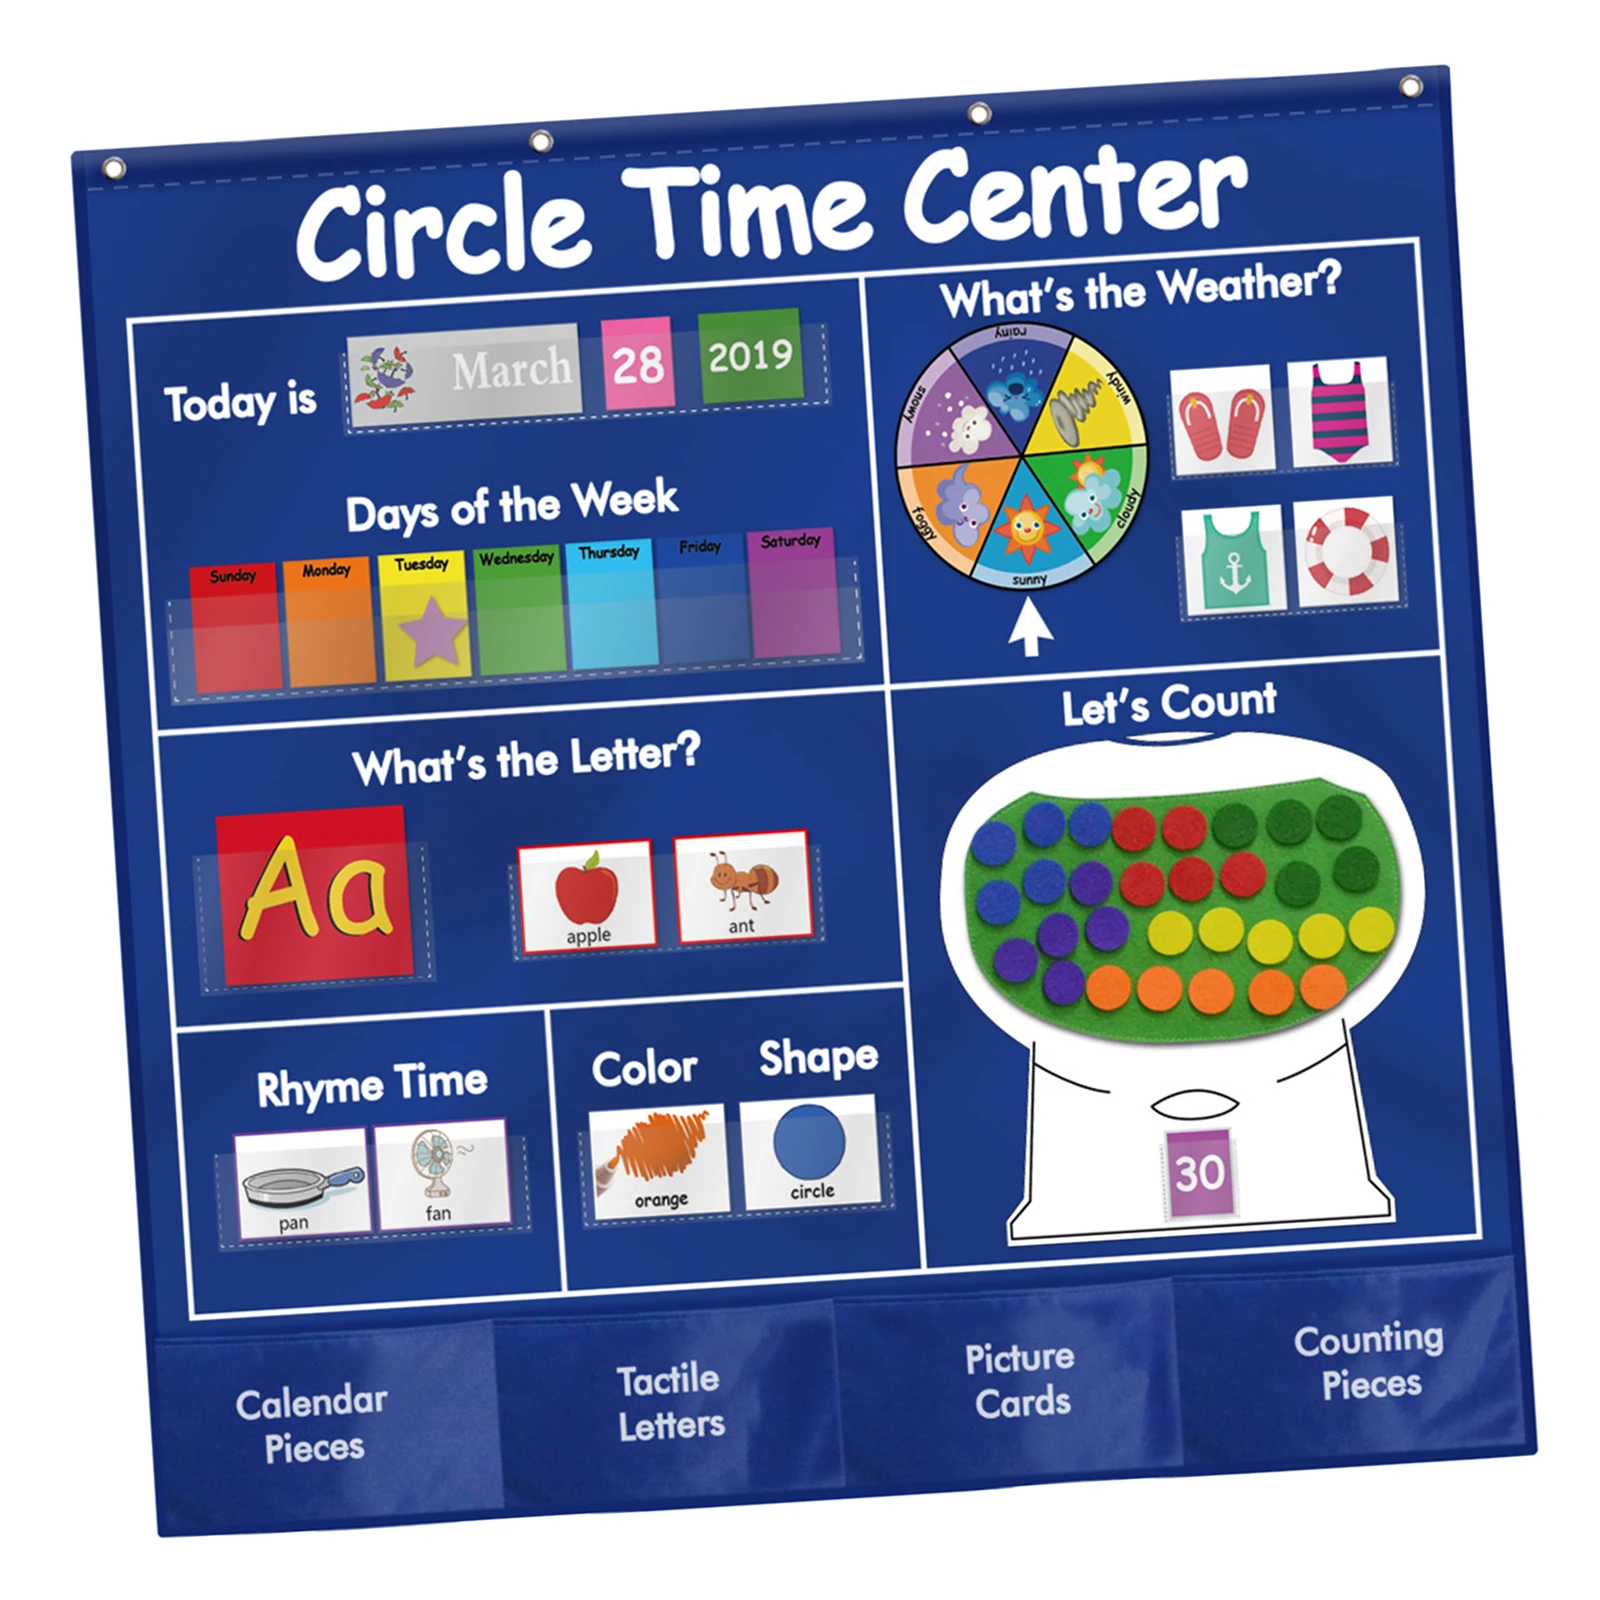 Circle Time Center Children, Toddler, Nursery, Early Learning, Kindergarten, Classroom Wall Chart Birthday Gifts